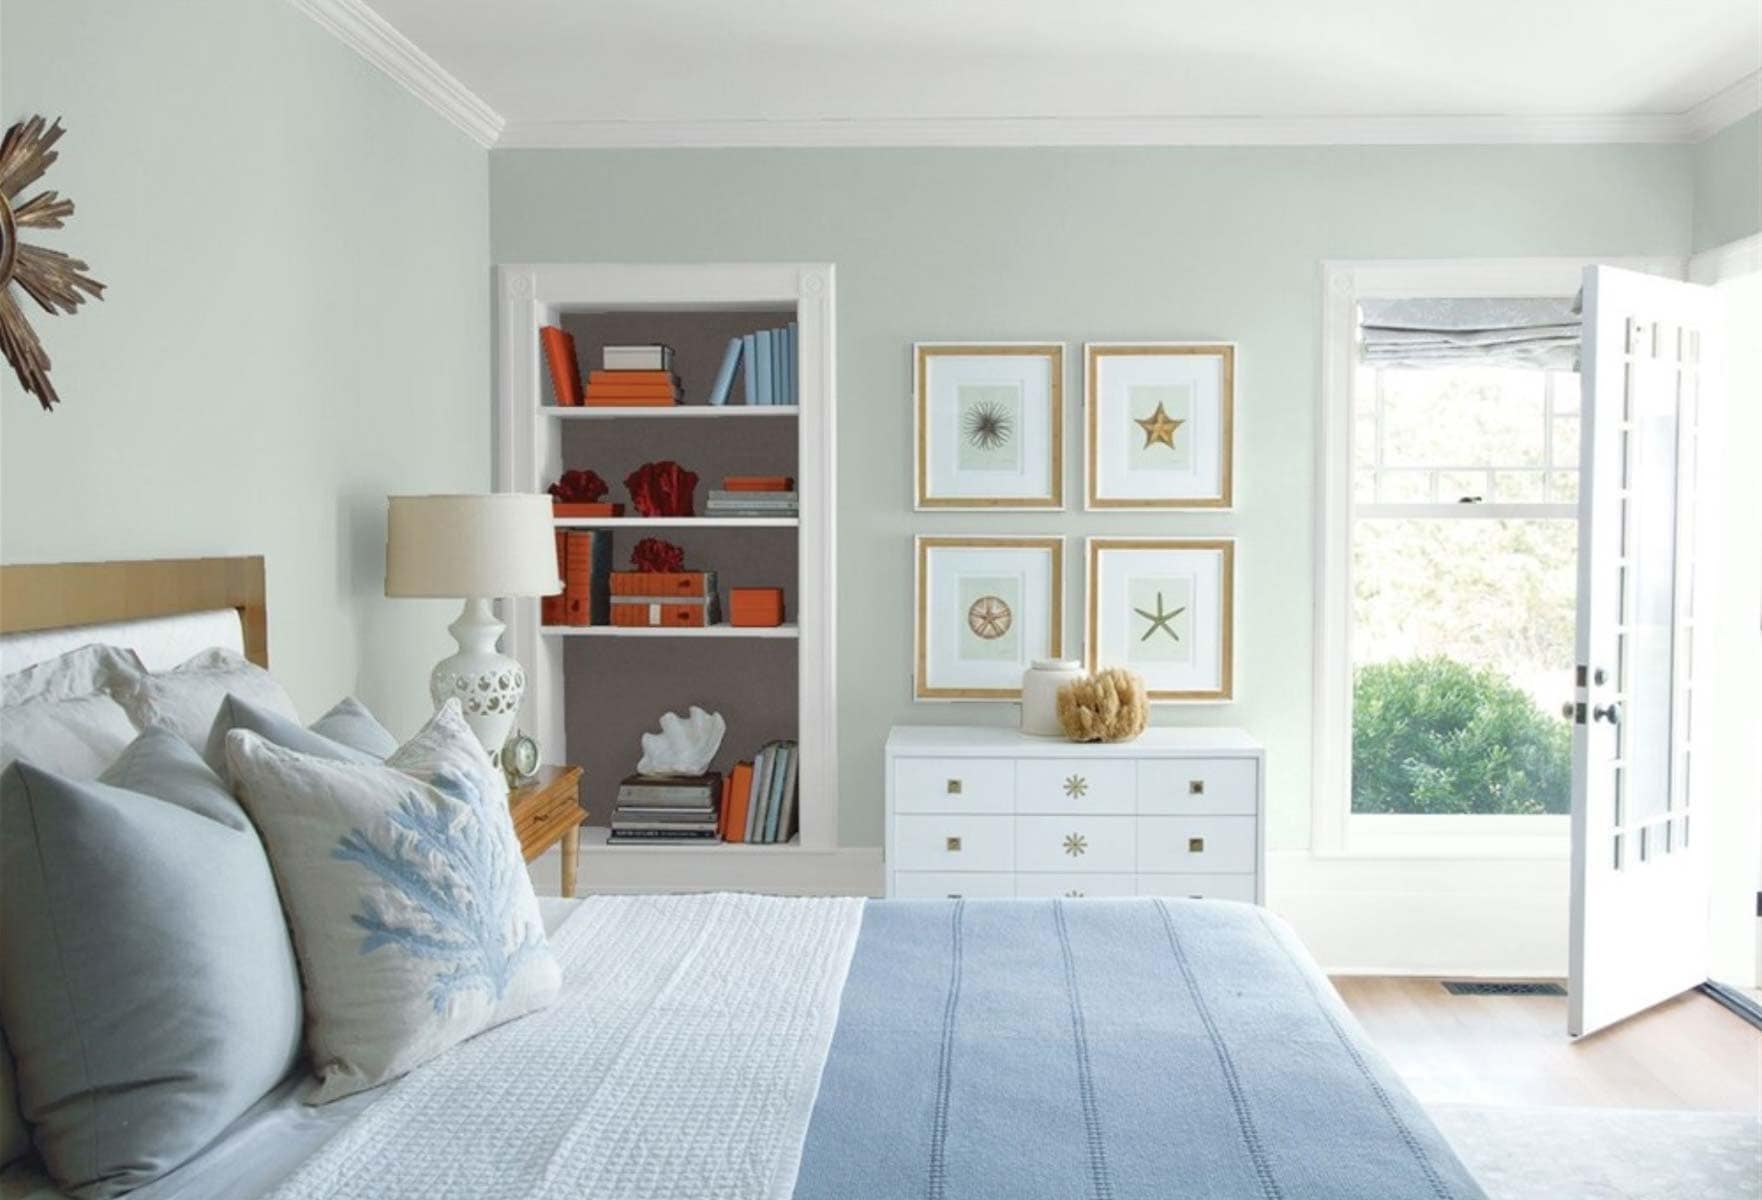 Bedroom Paint Color Ideas You'll Love (2020 Edition)